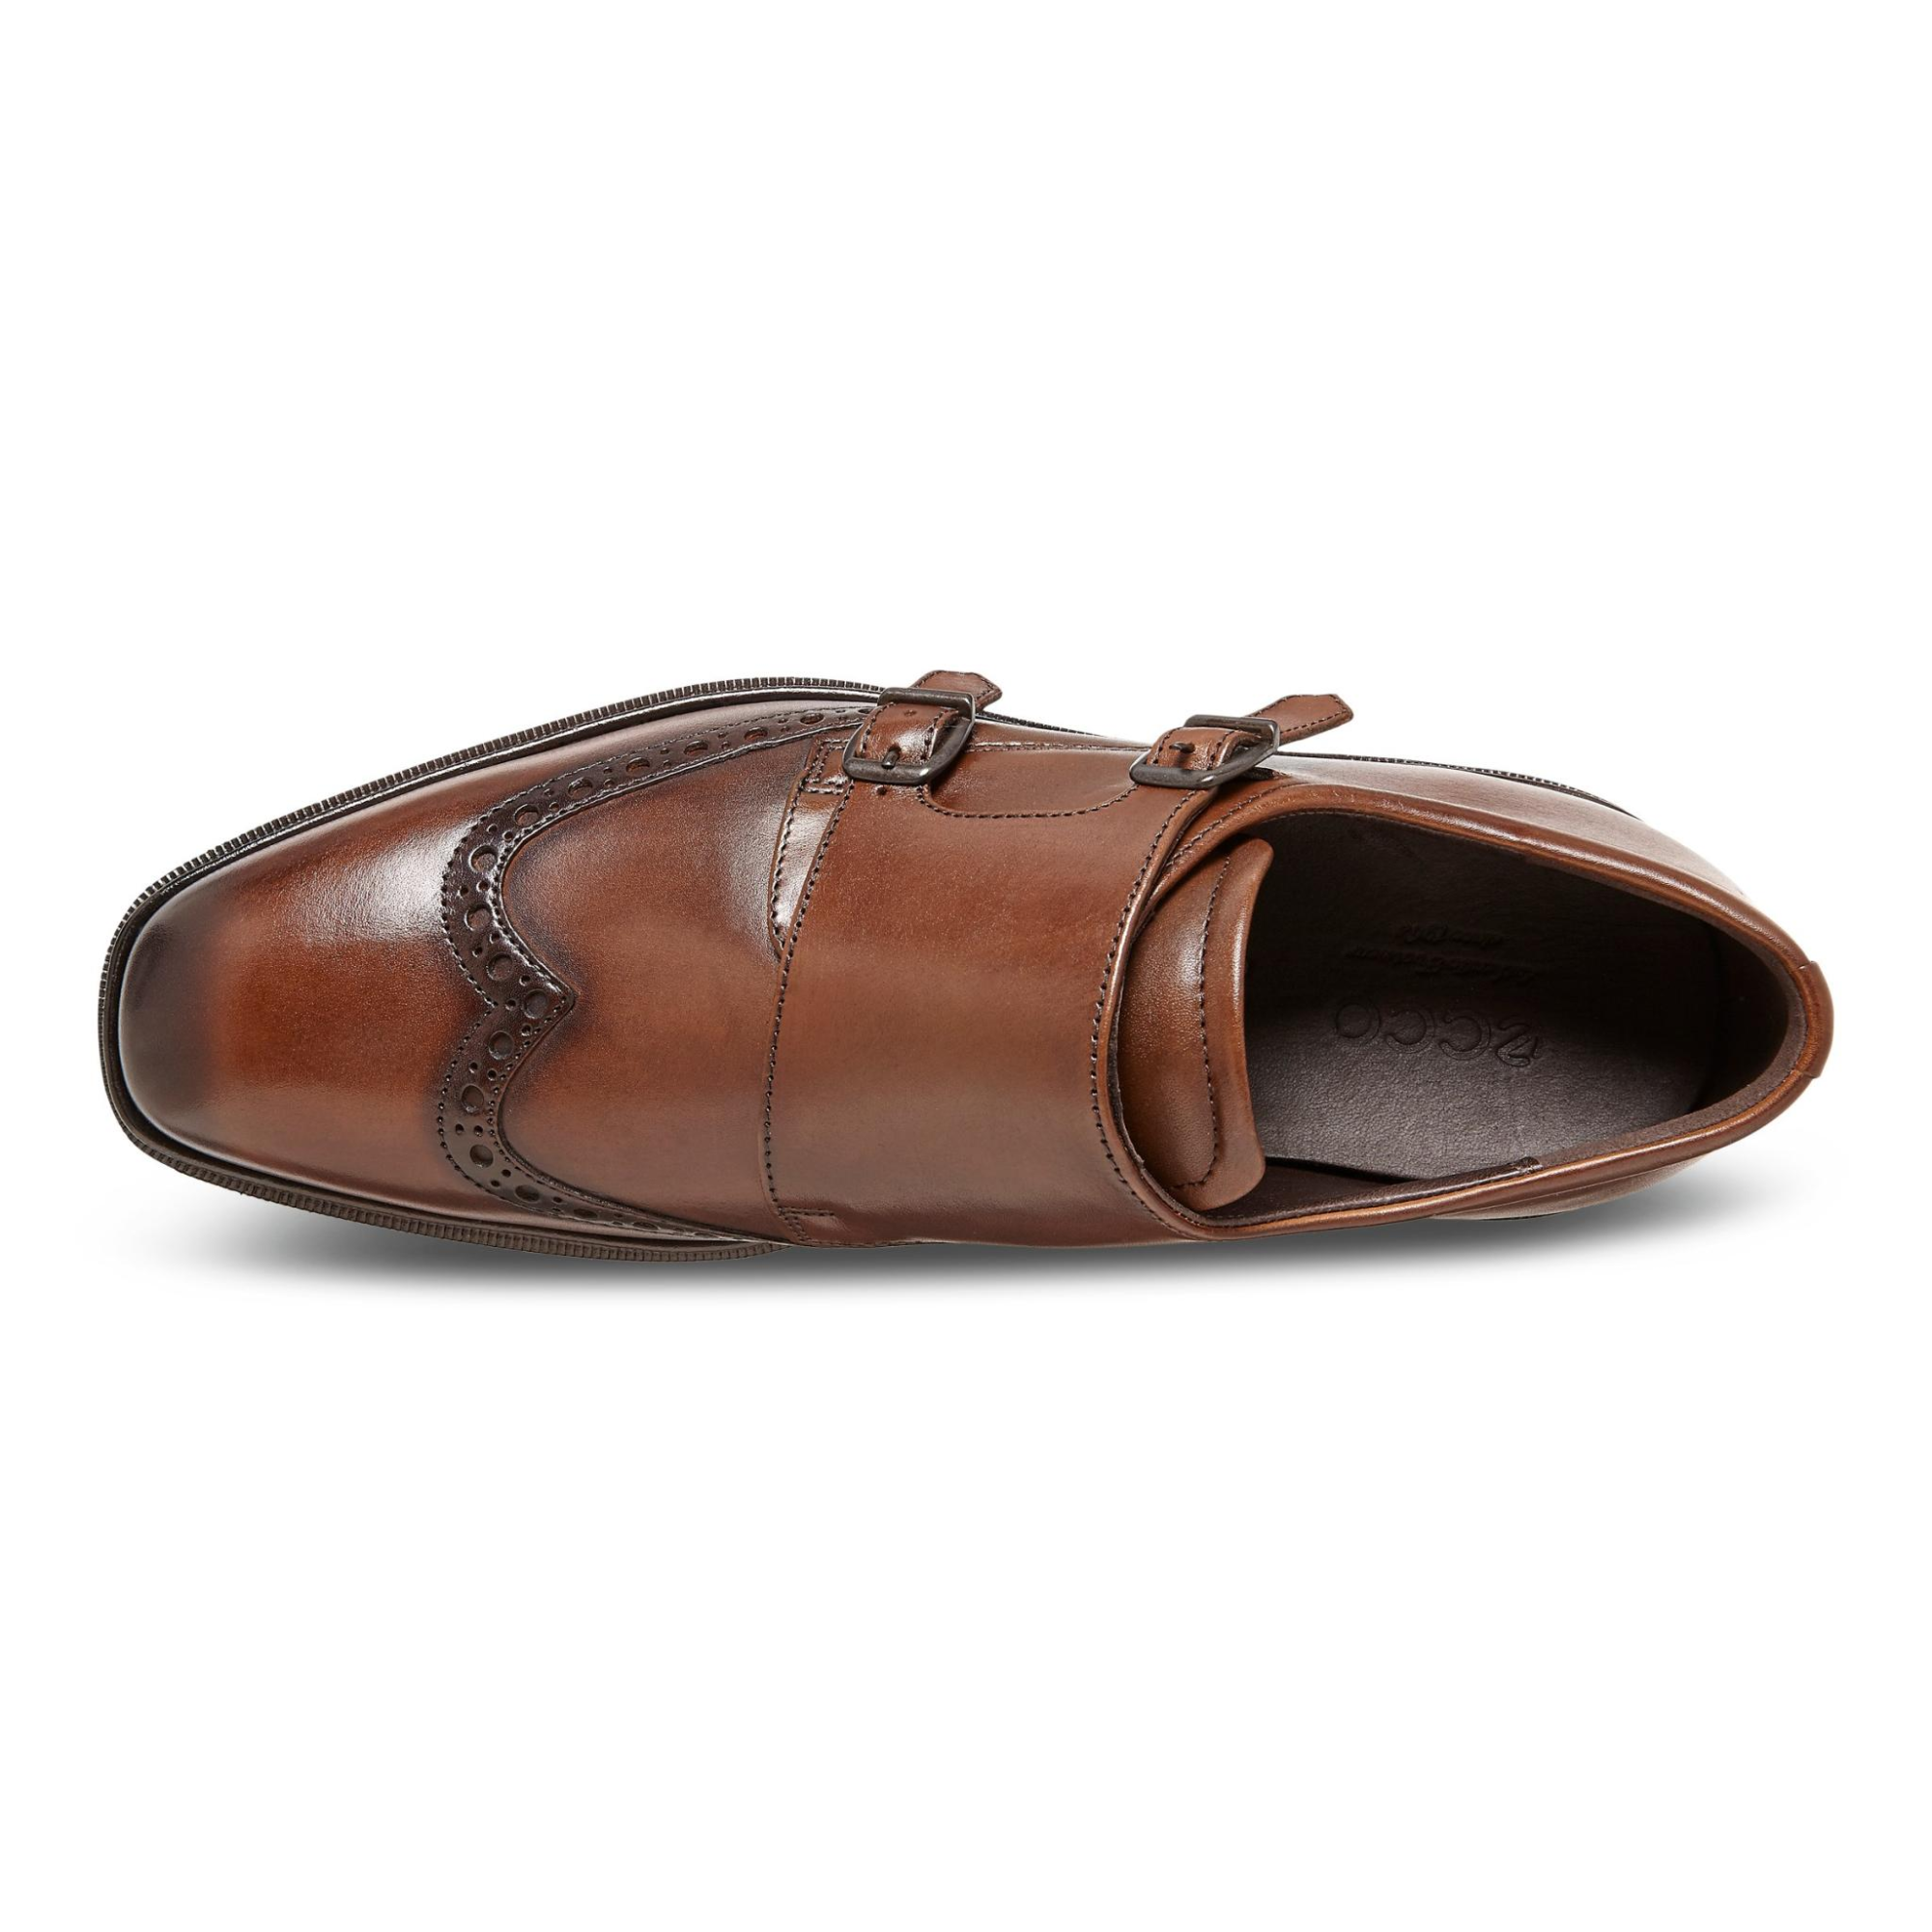 rigdom Vejrtrækning gave Ecco Illinois Monk Strap 43 - Products - Veryk Mall - Veryk Mall, many  product, quick response, safe your money!